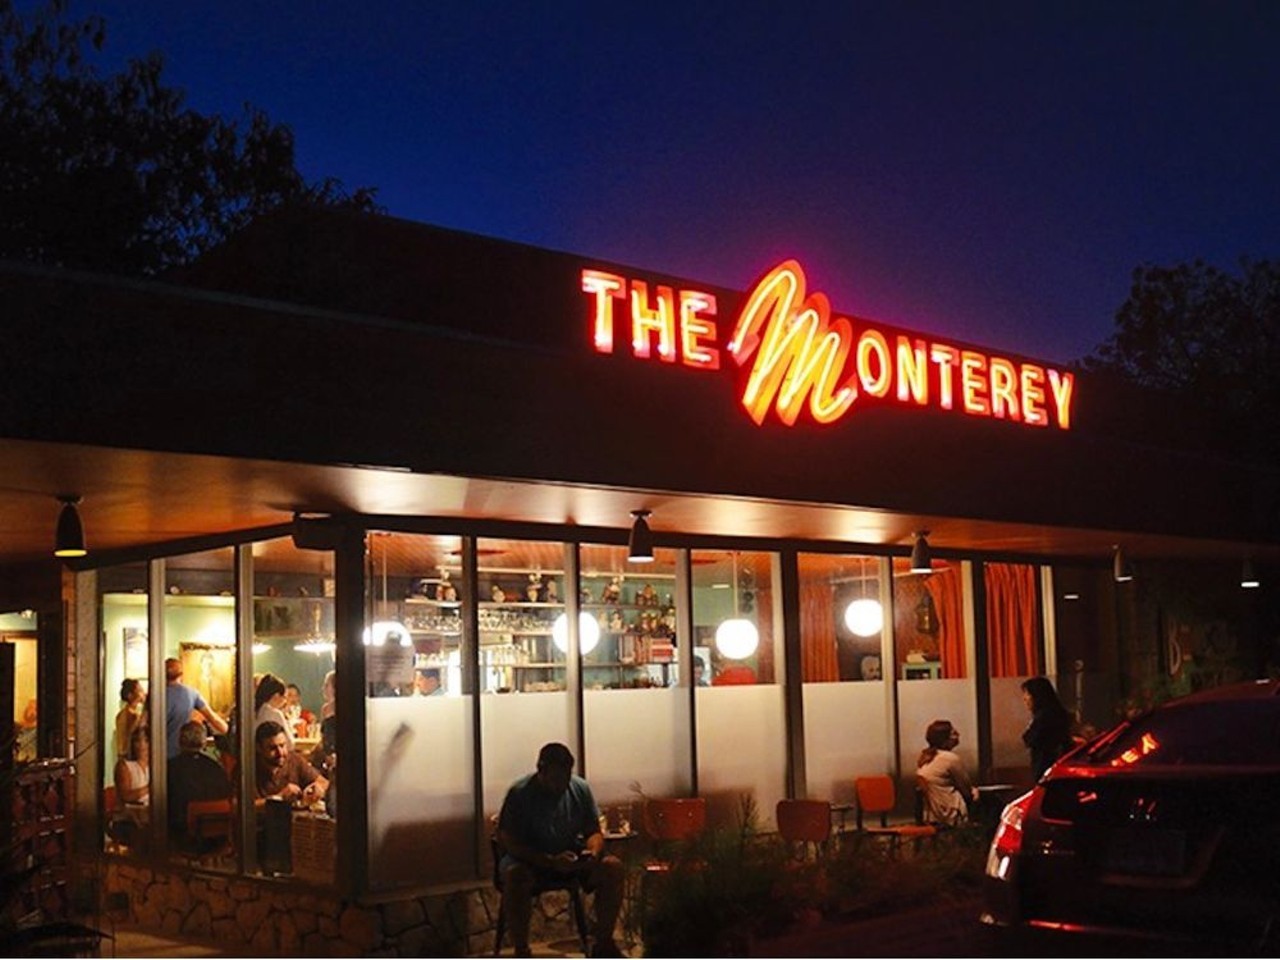 The Monterey
Southtown restaurant The Monterey opened around 2010 and closed five short years later, but it left a major mark on the city's culinary scene. Operated by Chad Carey, who now owns Barbaro and Hot Joy, the restaurant specialized in modern American cuisine made with locally sourced ingredients. It's often credited with raising the profile of fortified wines among SA diners.